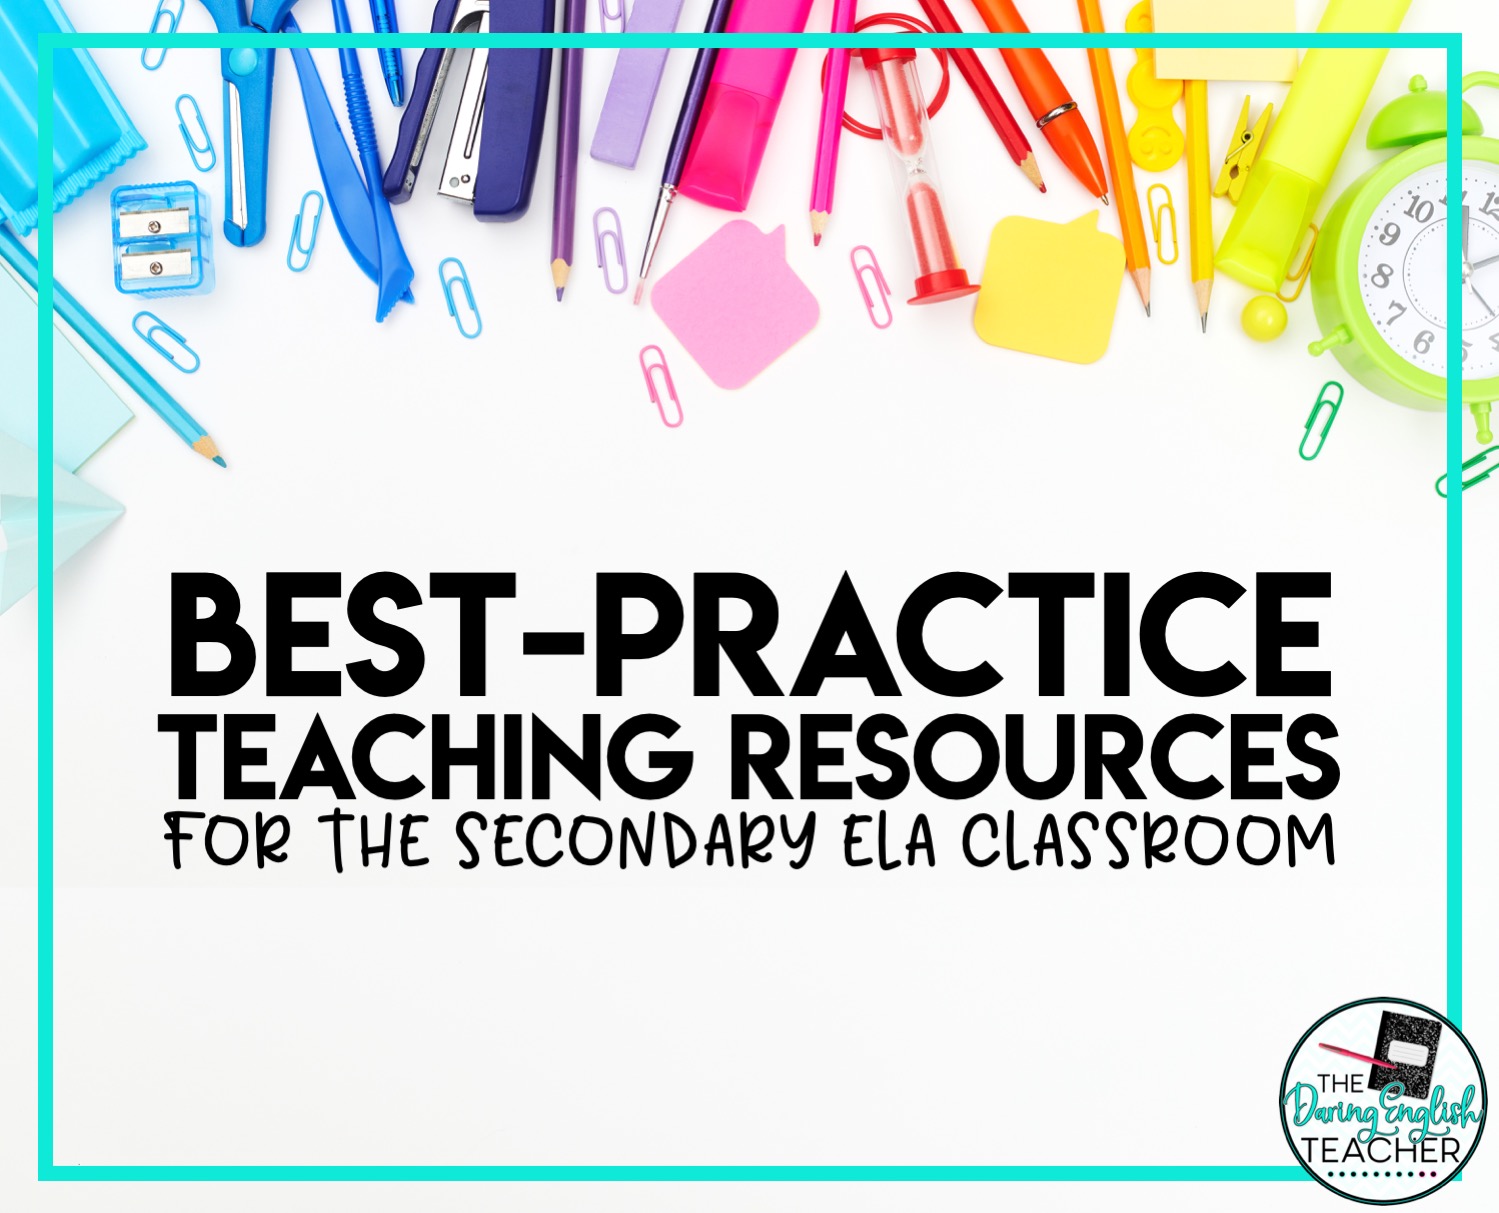 Resources for Teaching Secondary ELA